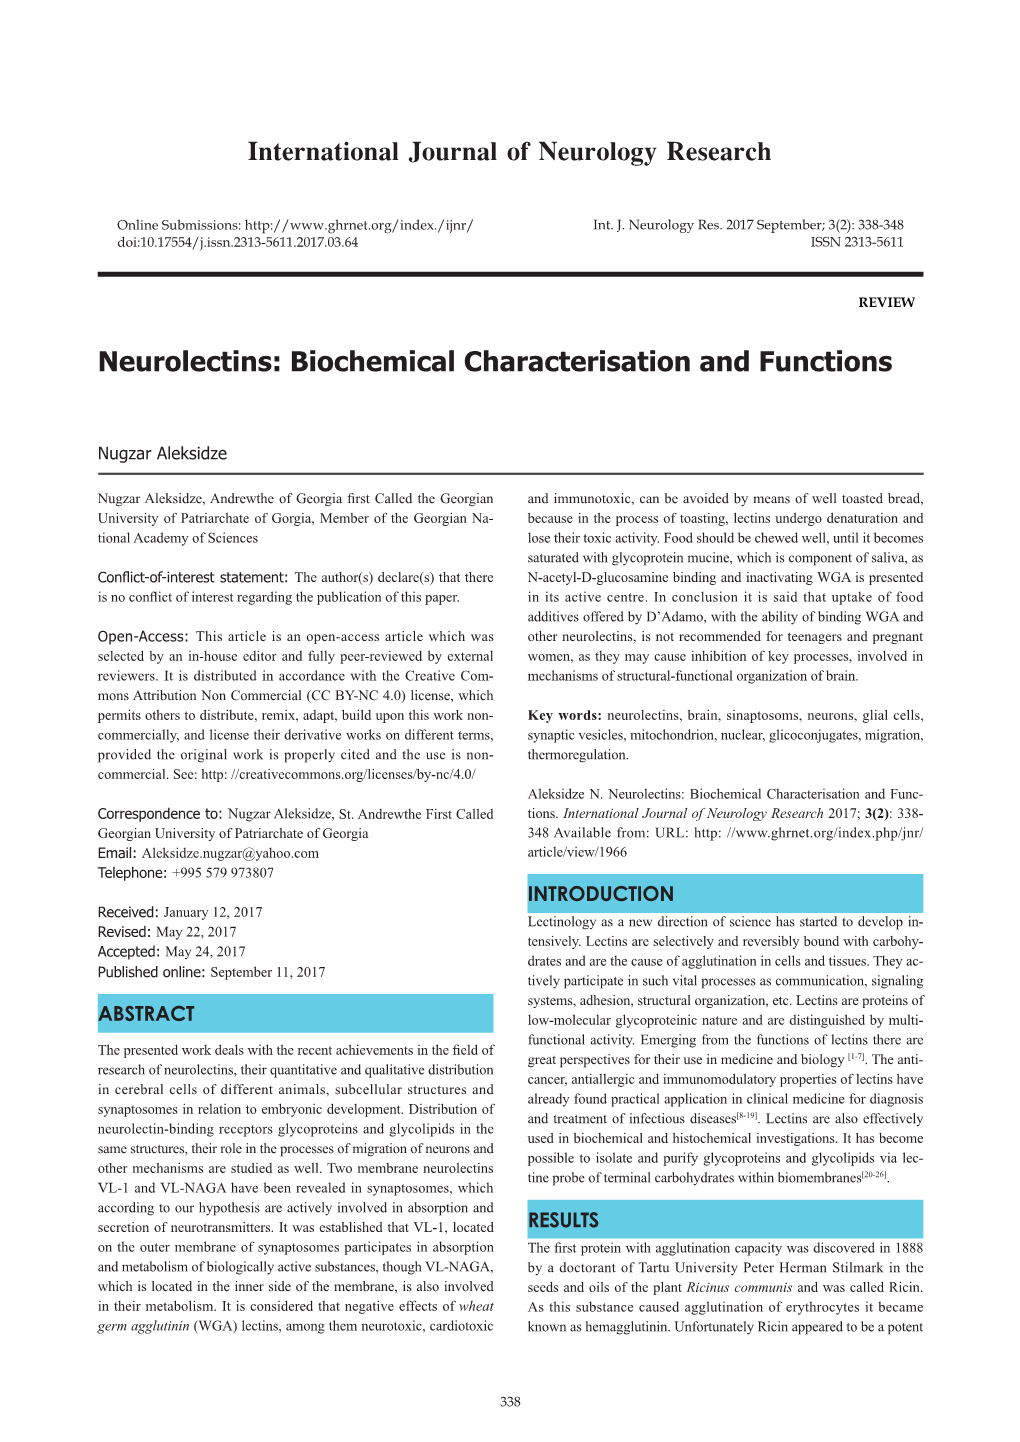 Neurolectins: Biochemical Characterisation and Functions